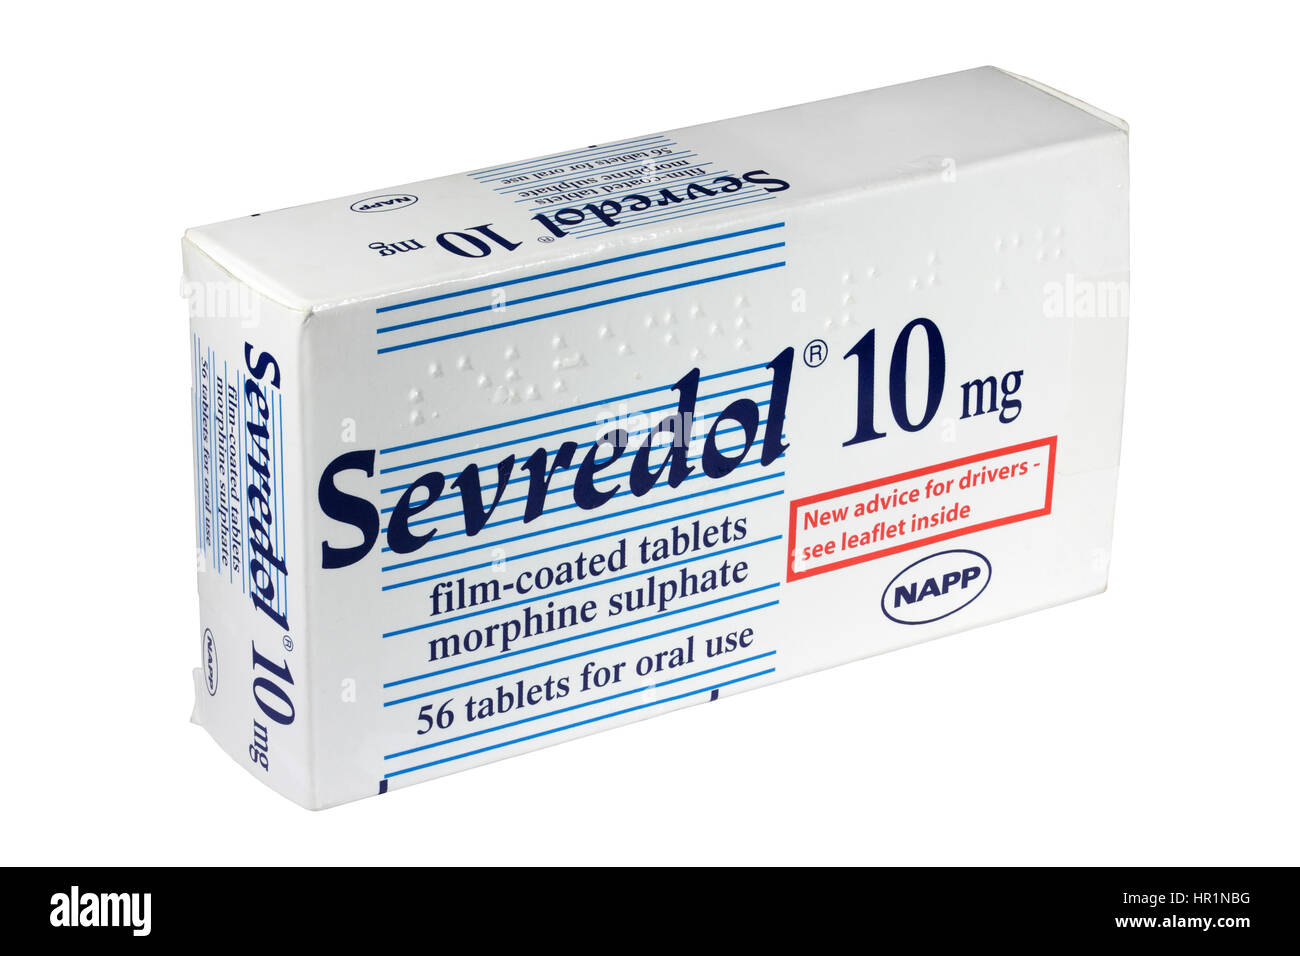 A box of 56 NAPP Sevredol 10mg morphine sulphate film-coated tablets isolated on a white background opioid painkillers UK prescription drug Stock Photo